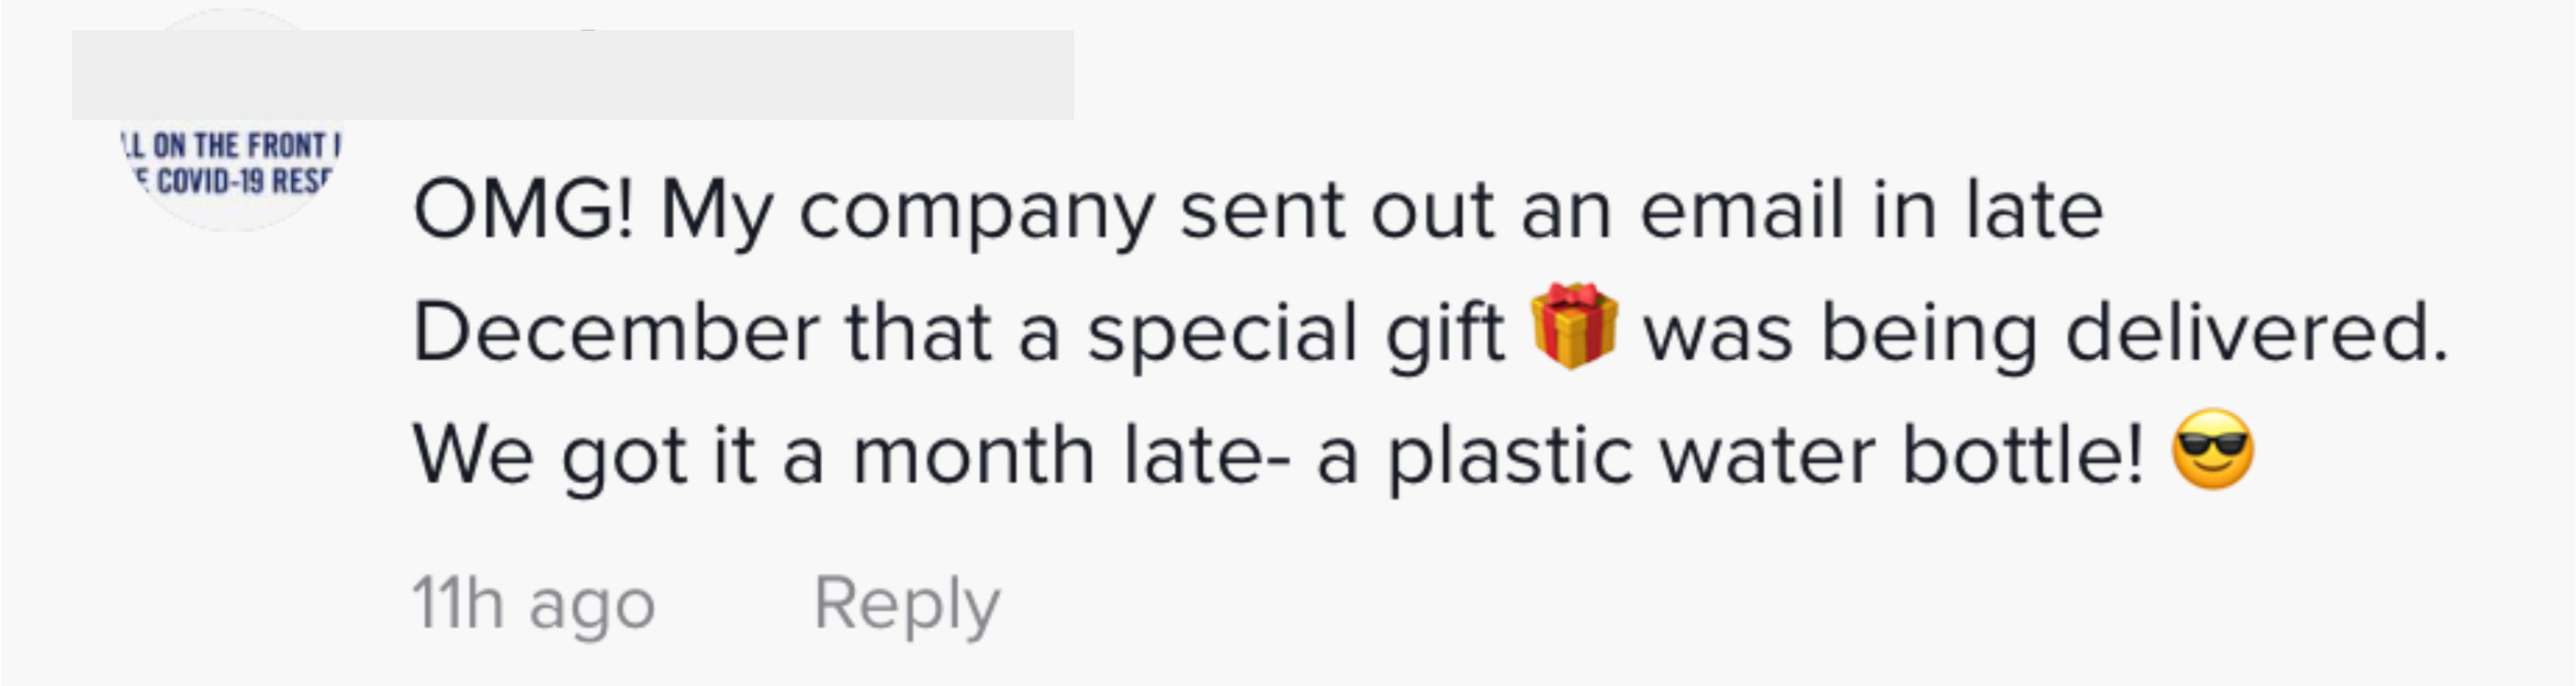 My holiday gift was a plastic water bottle